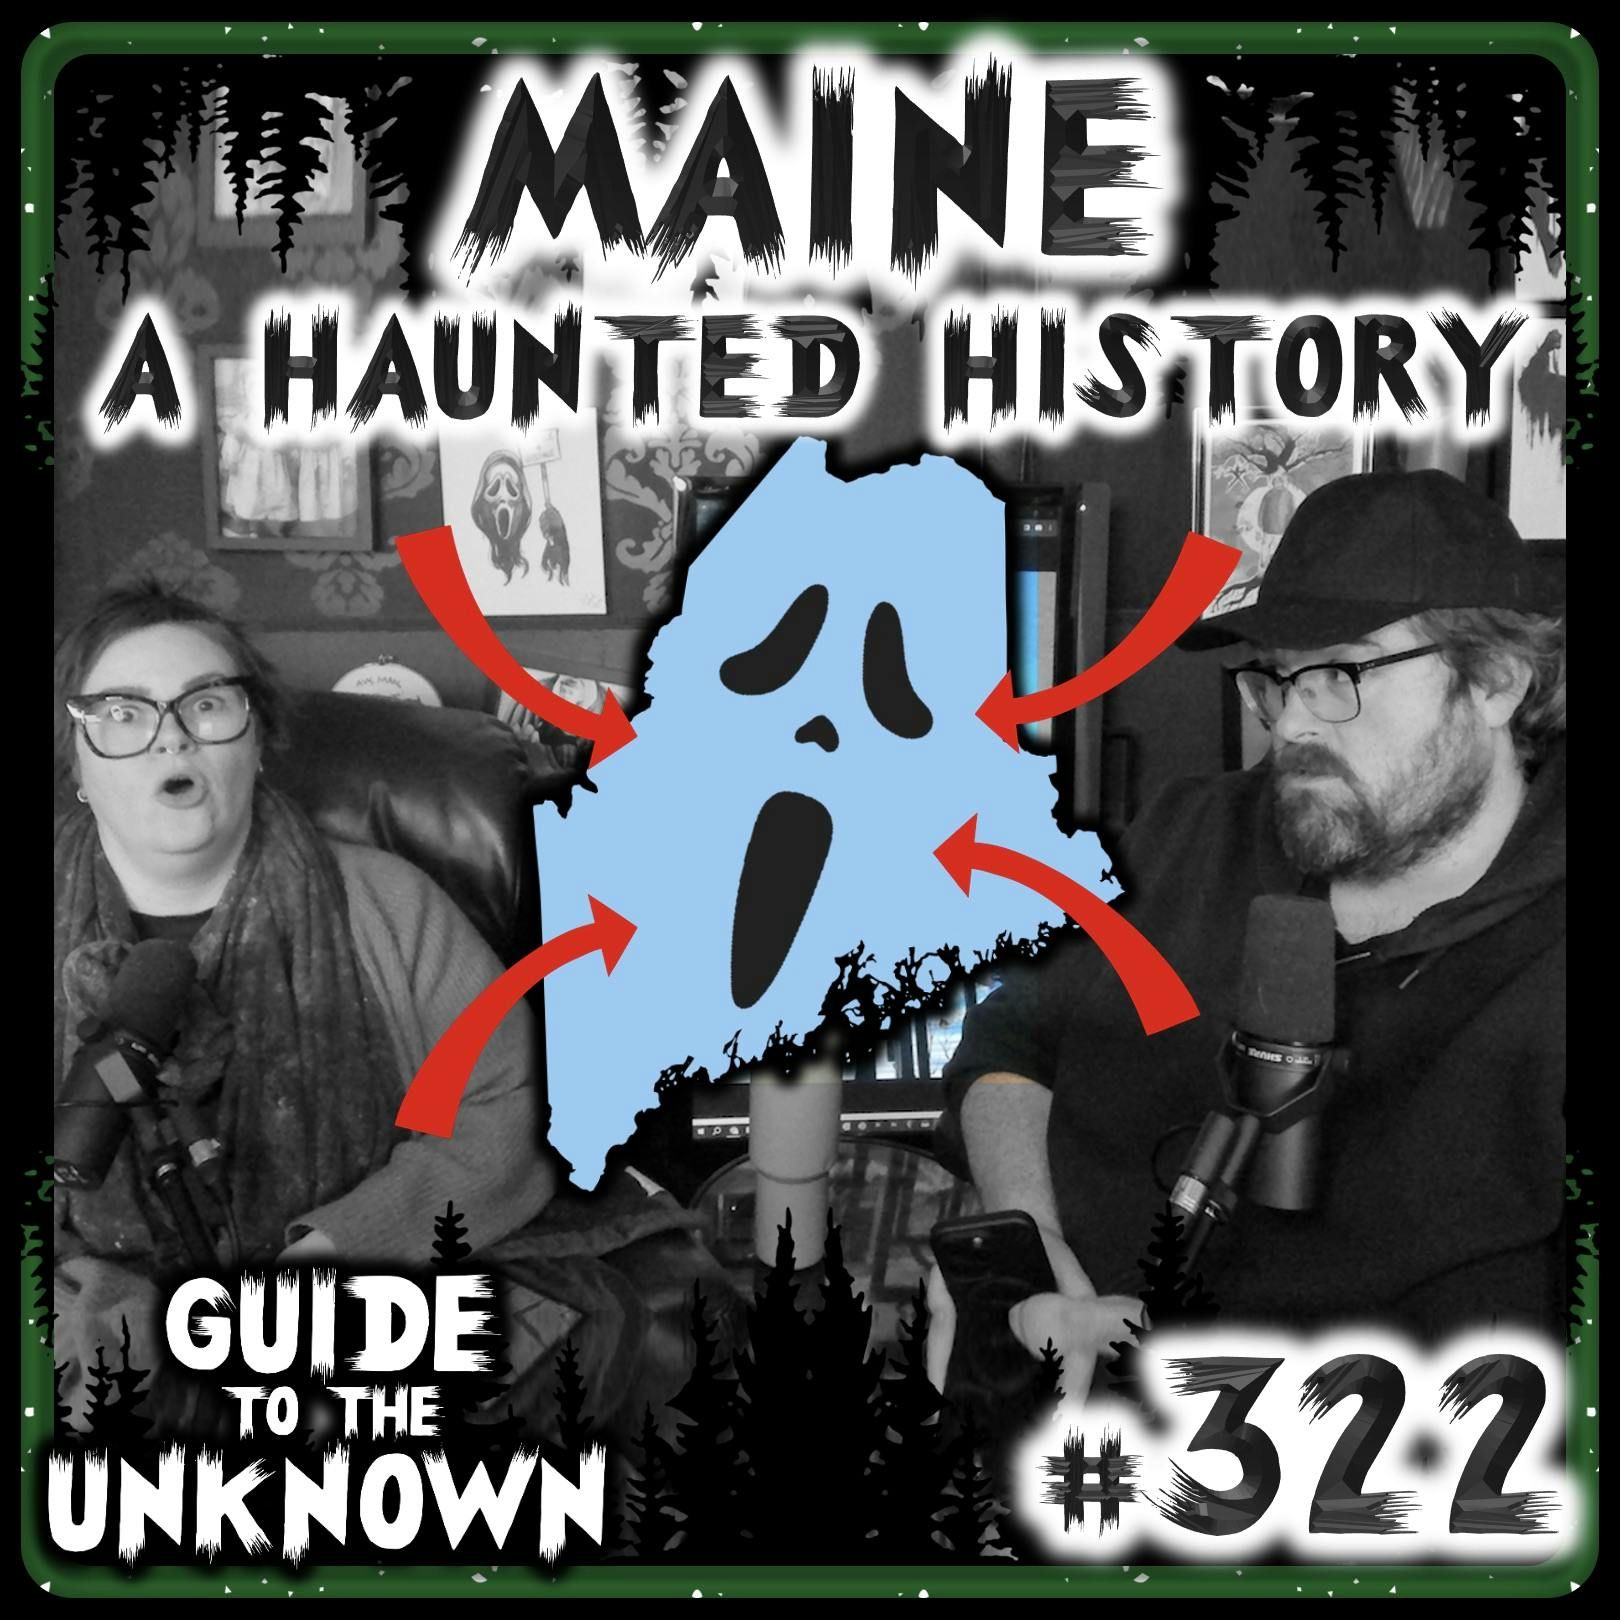 322: MAINE - A Haunted History